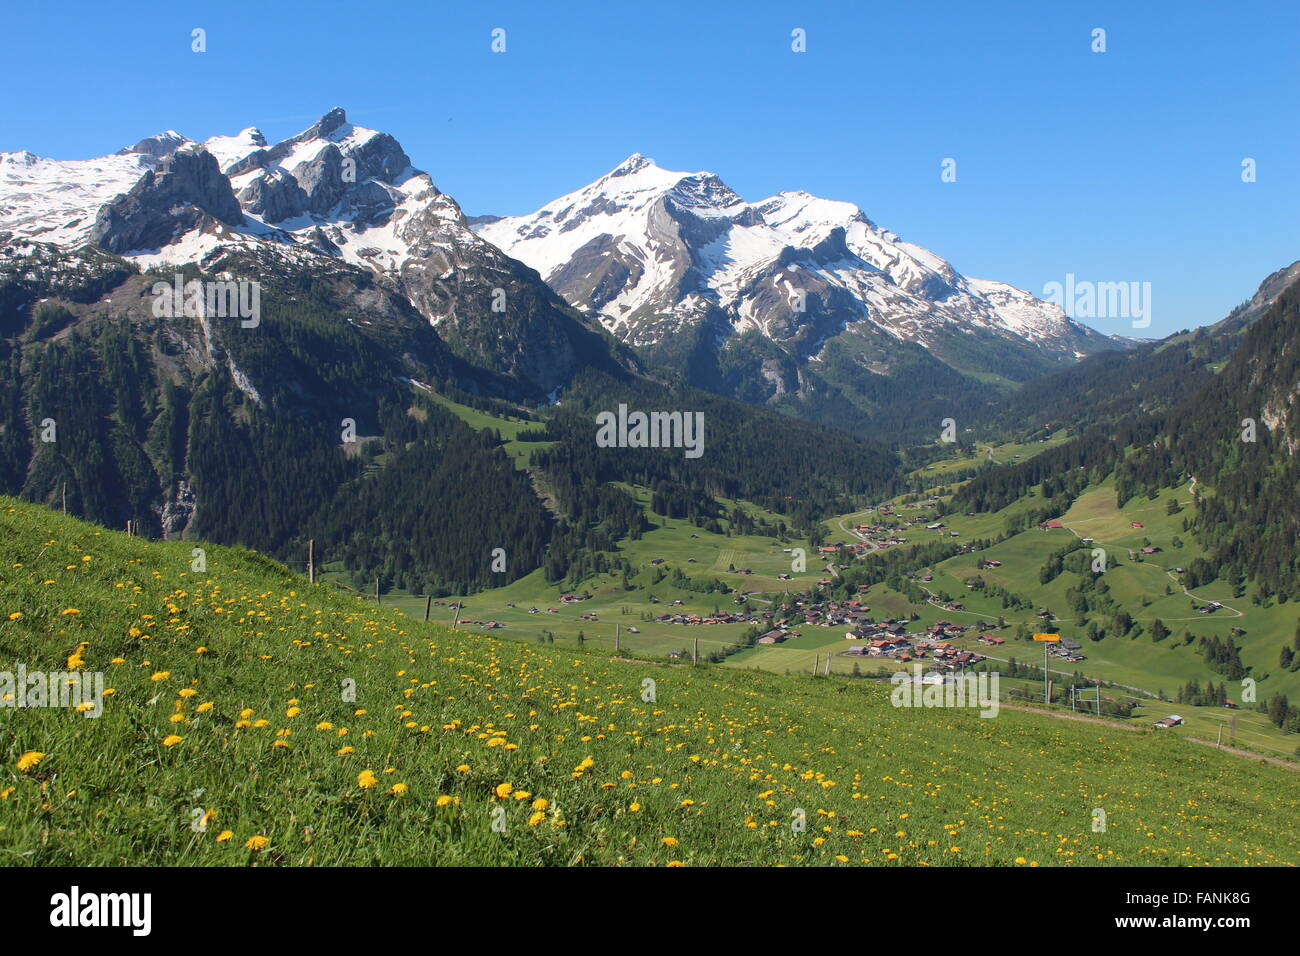 Green Meadow With Wildflowers And Snow Capped Mountains Stock Photo Alamy